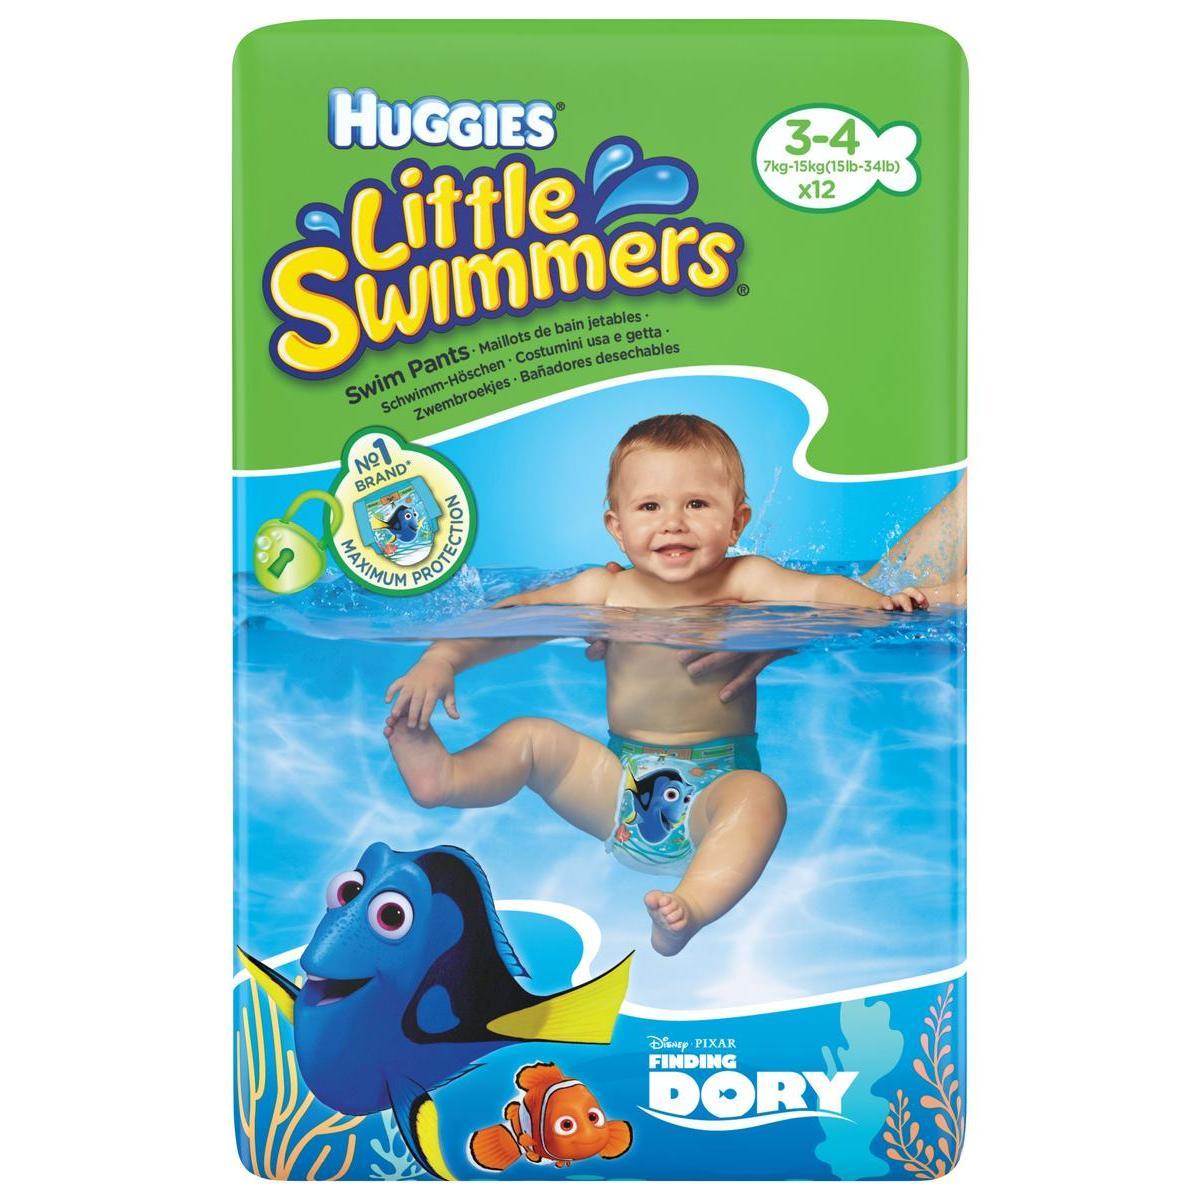 11 maillots jetables Little Swimmers - Différentes tailles - Taille 3/4 ans - Multicolore - HUGGIES